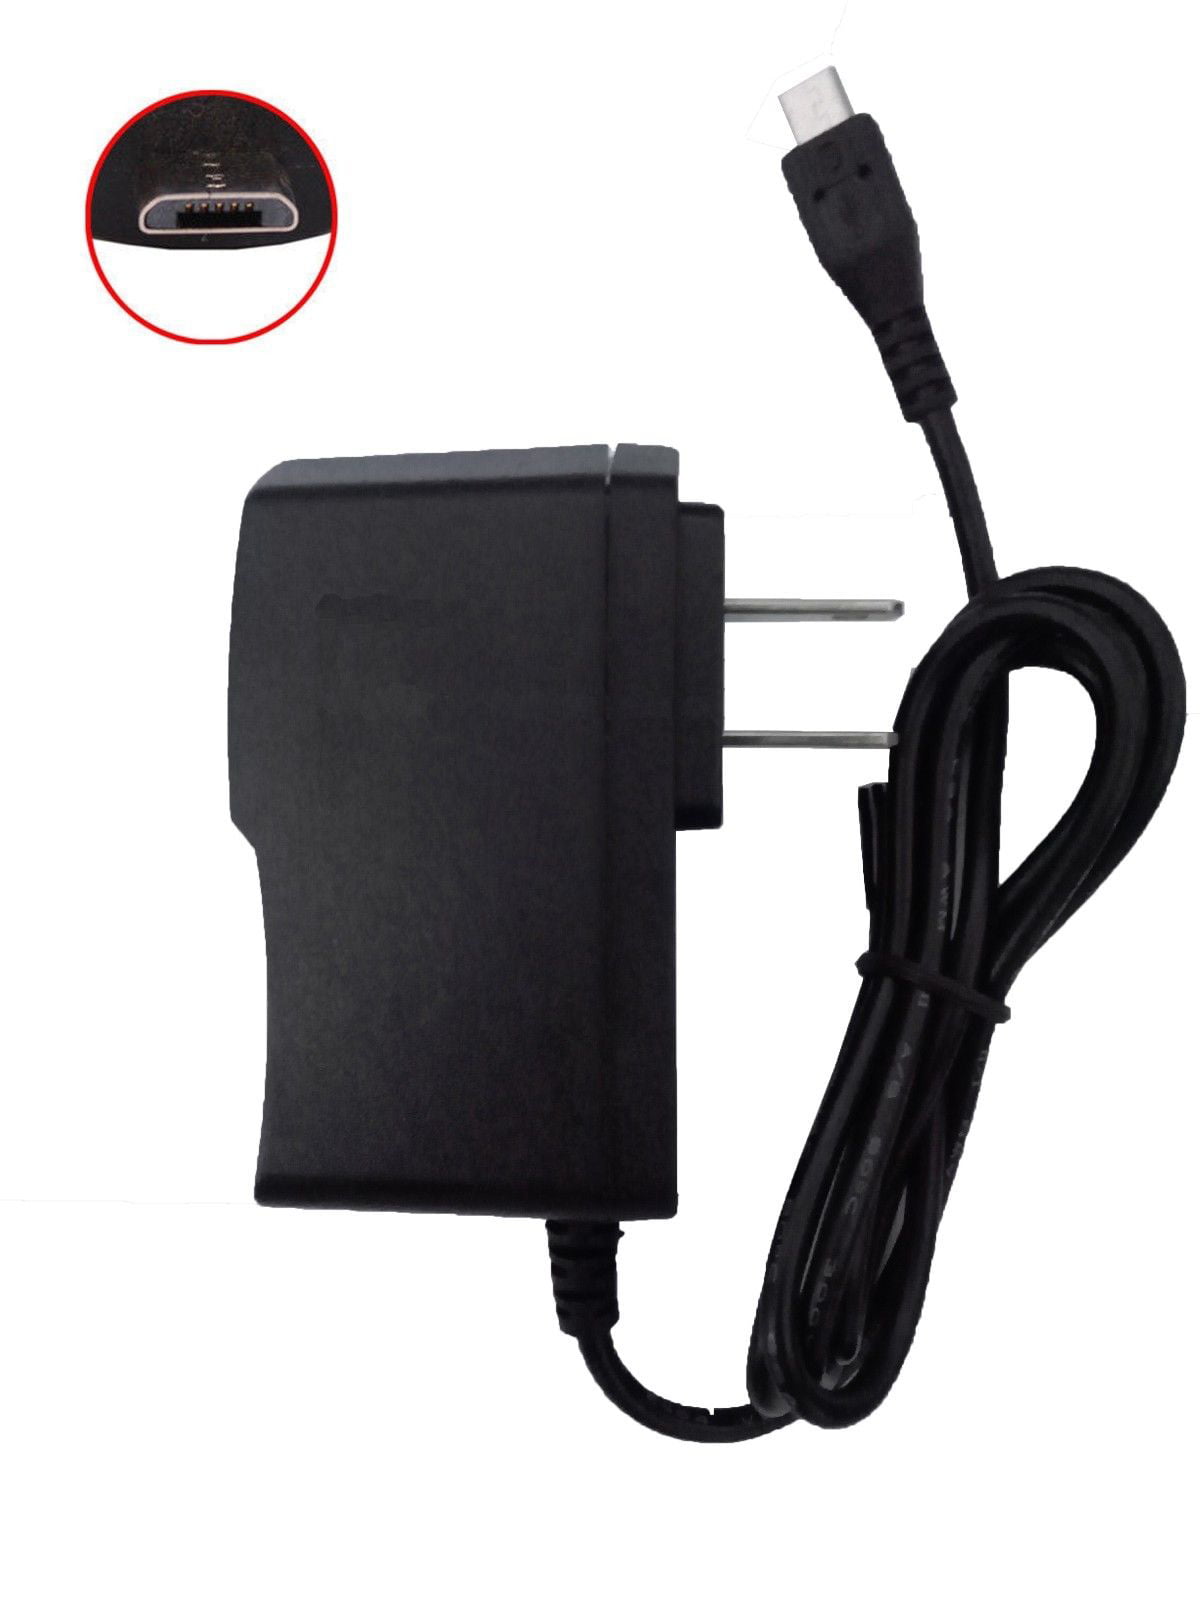 AC Adapter Charger for Samsung SPH-M400 M840 Cell Phone Power Supply Cord